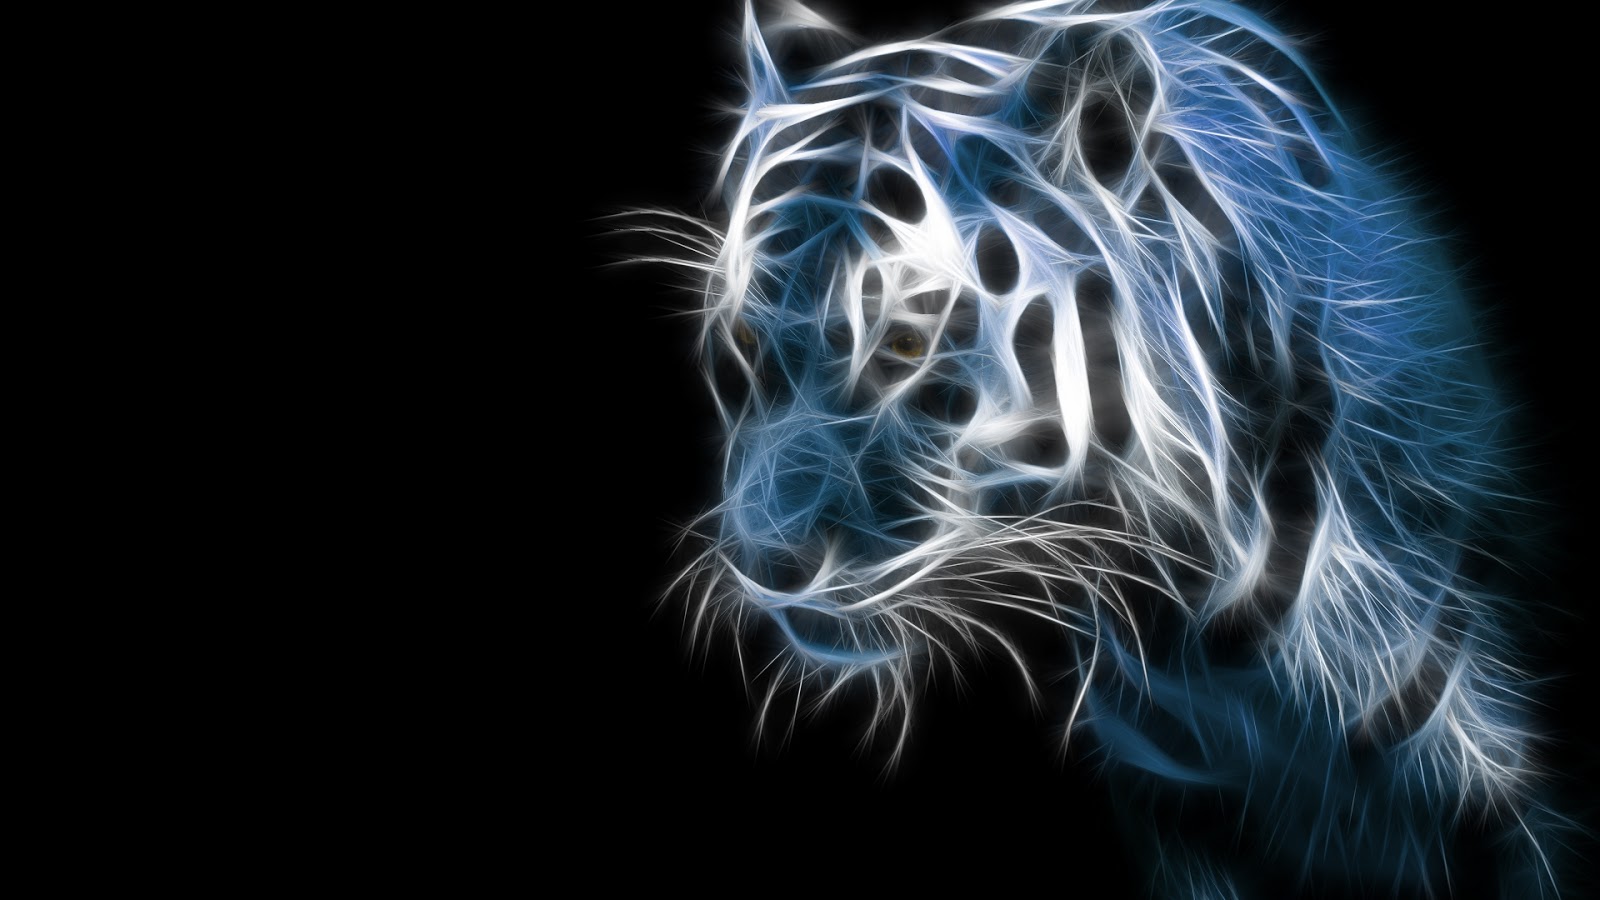 Tigers Wallpaper Tiger Pictures